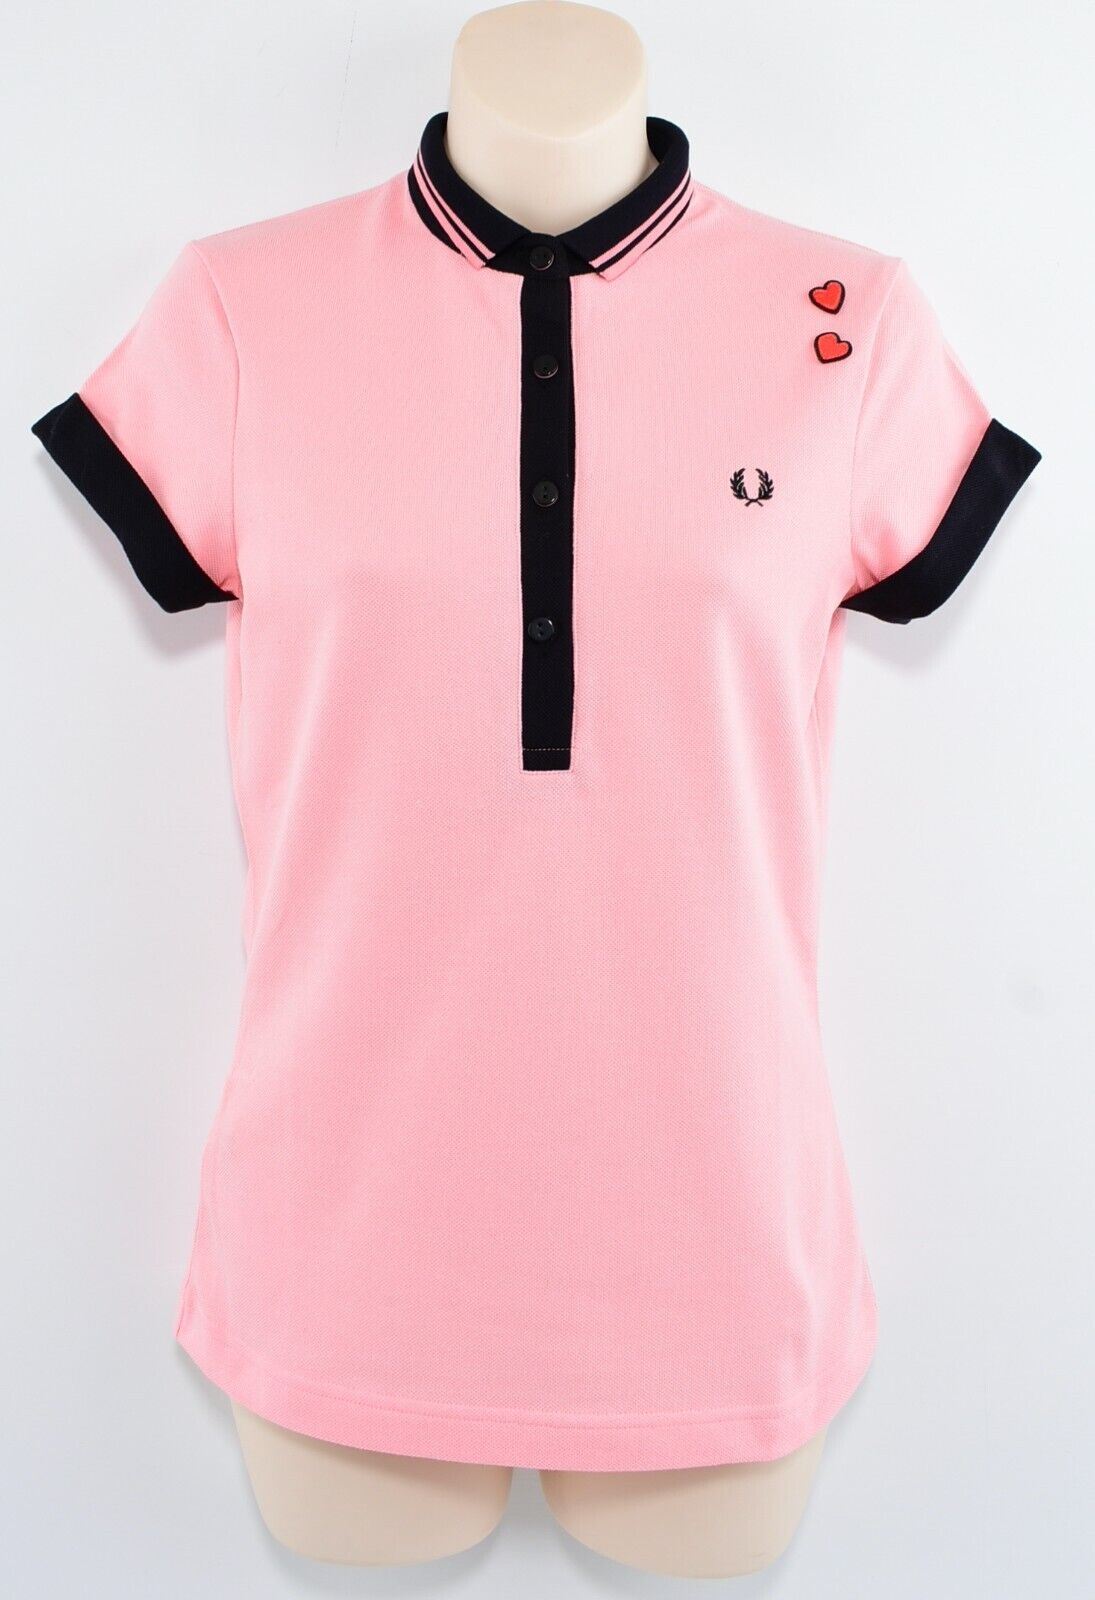 FRED PERRY x AMY WINEHOUSE FOUNDATION Womens Heart Polo Shirt , Pink, size UK 6